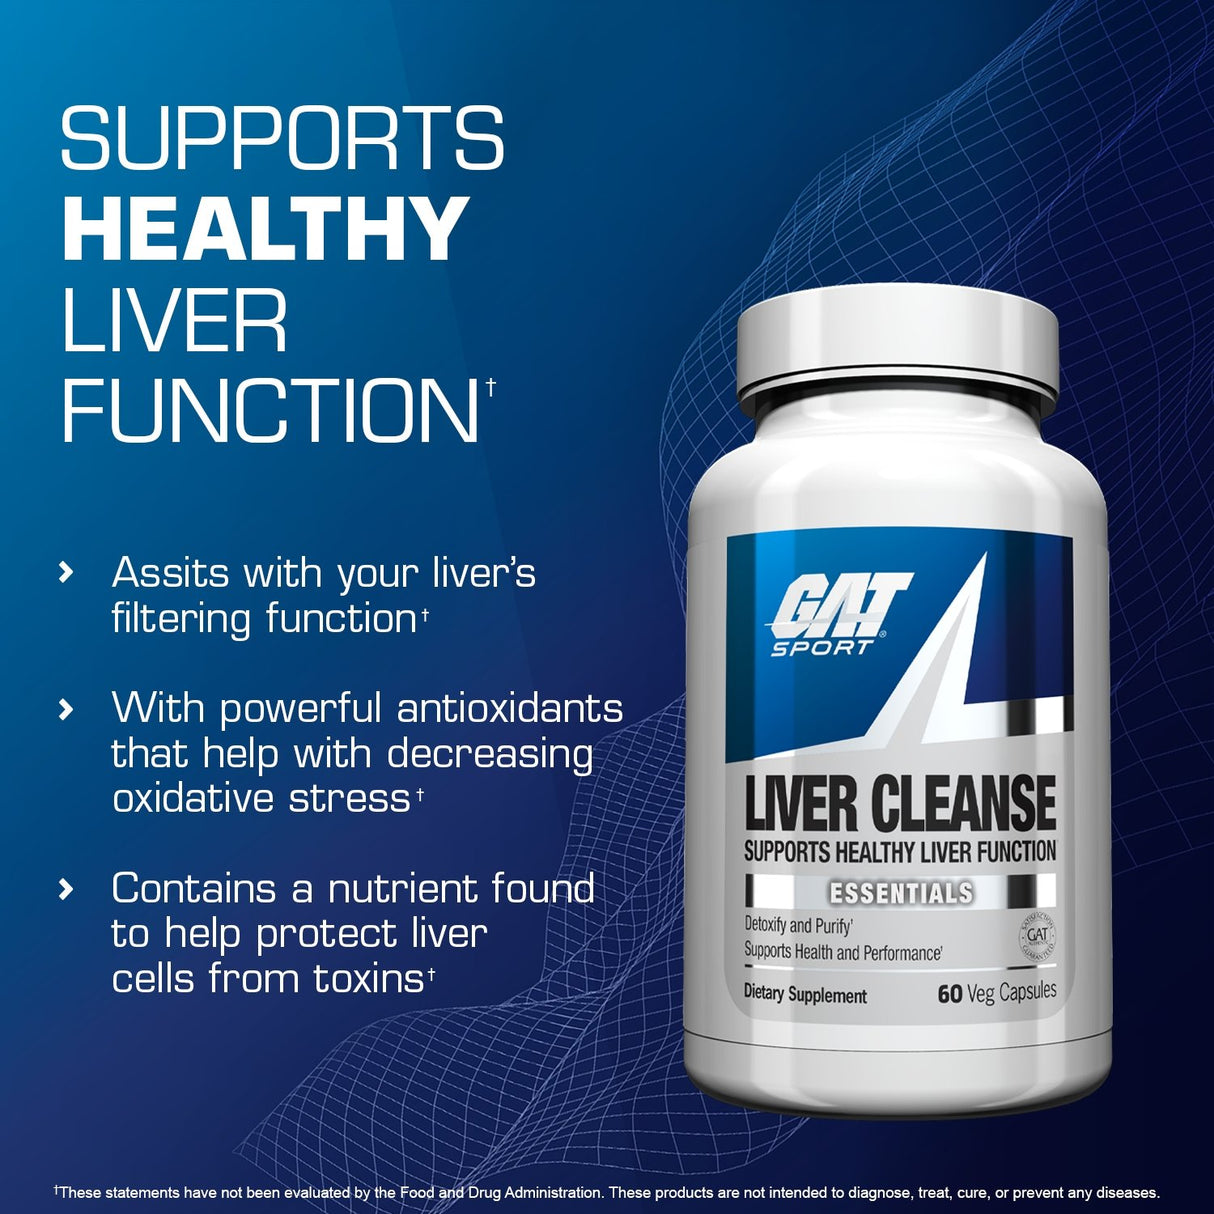 GAT SPORT LIVER CLEANSE - healthy liver function